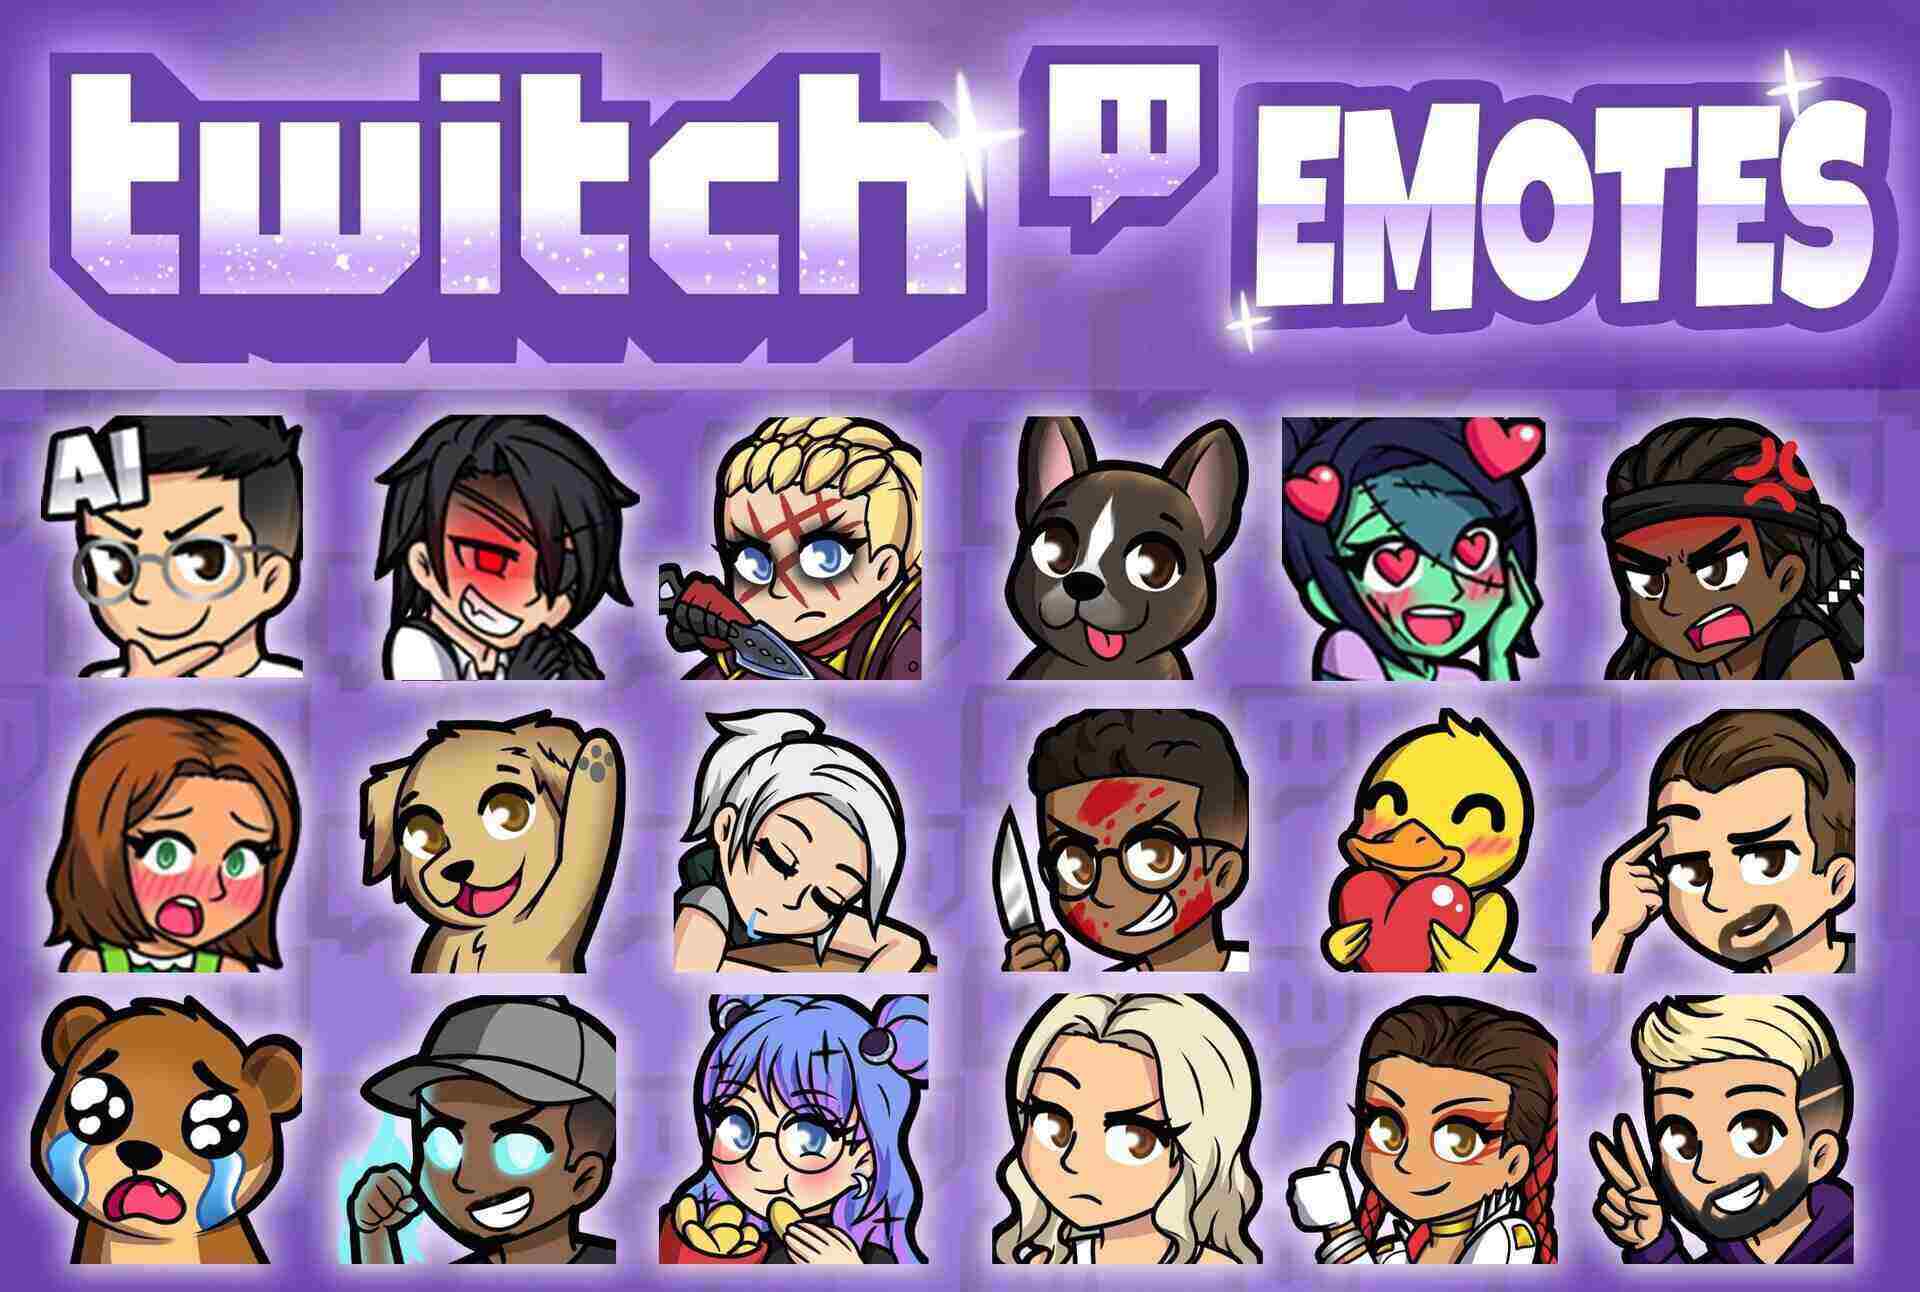 How Long Does It Take for Twitch to Approve Emotes?